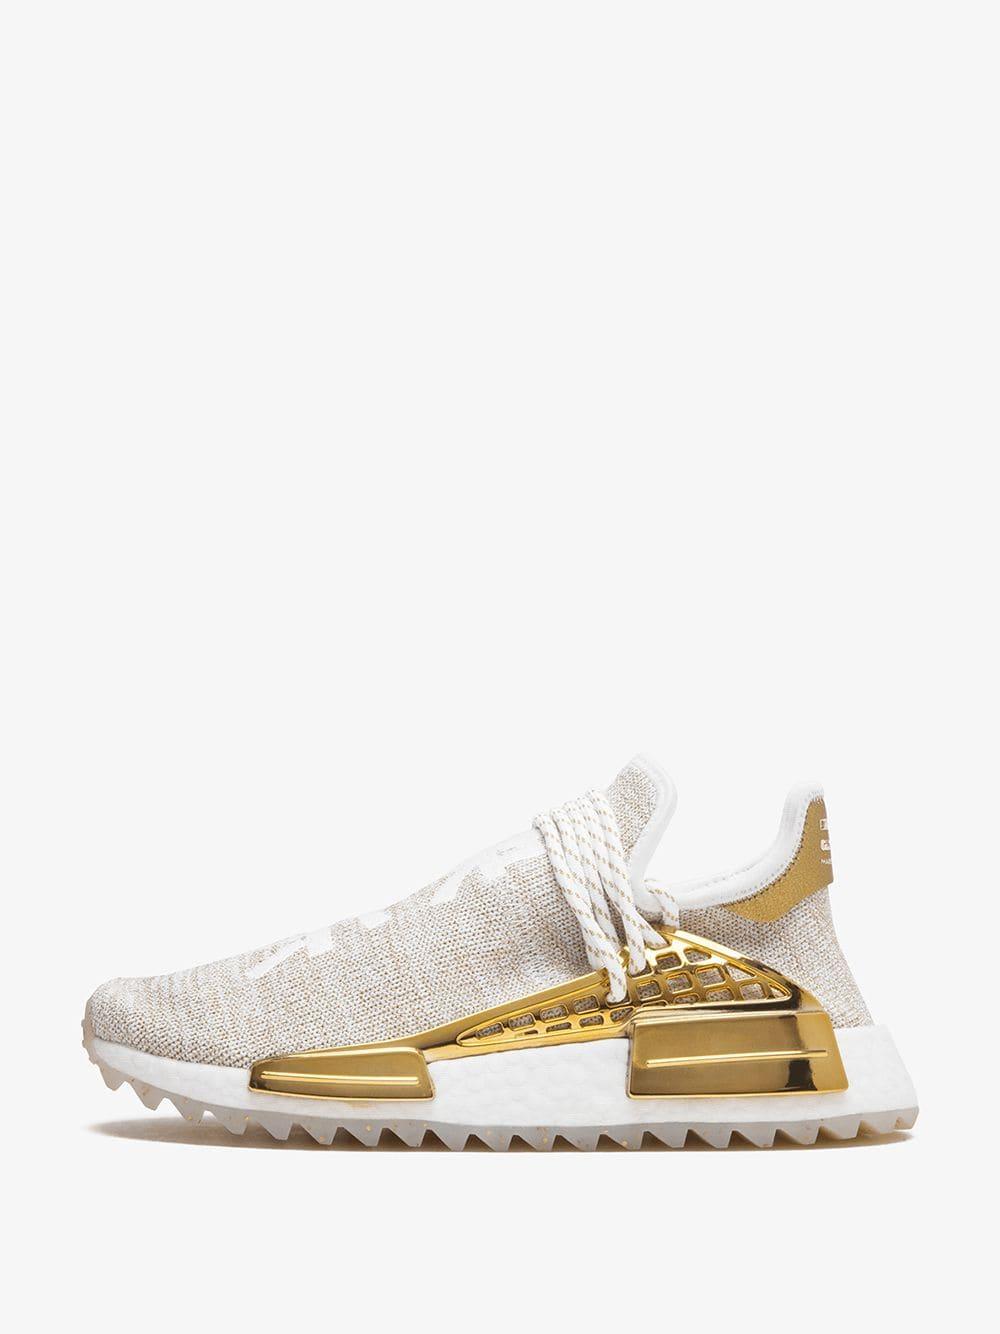 adidas Gold And White X Pharrell Williams Hu Holi Nmd Sneakers in Metallic  for Men | Lyst